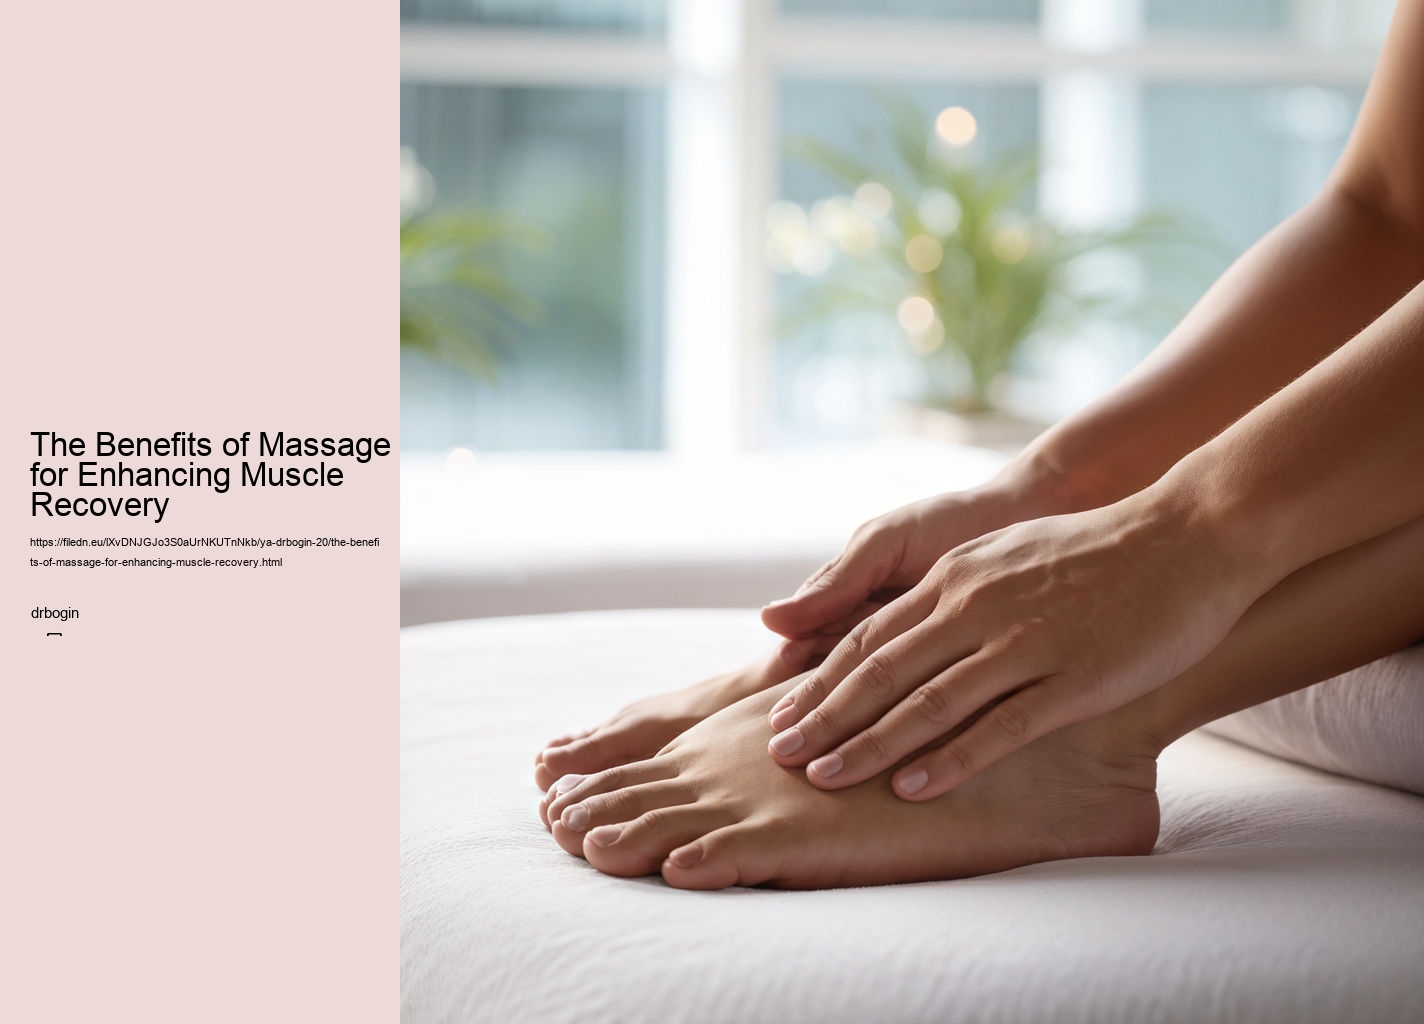 The Benefits of Massage for Enhancing Muscle Recovery